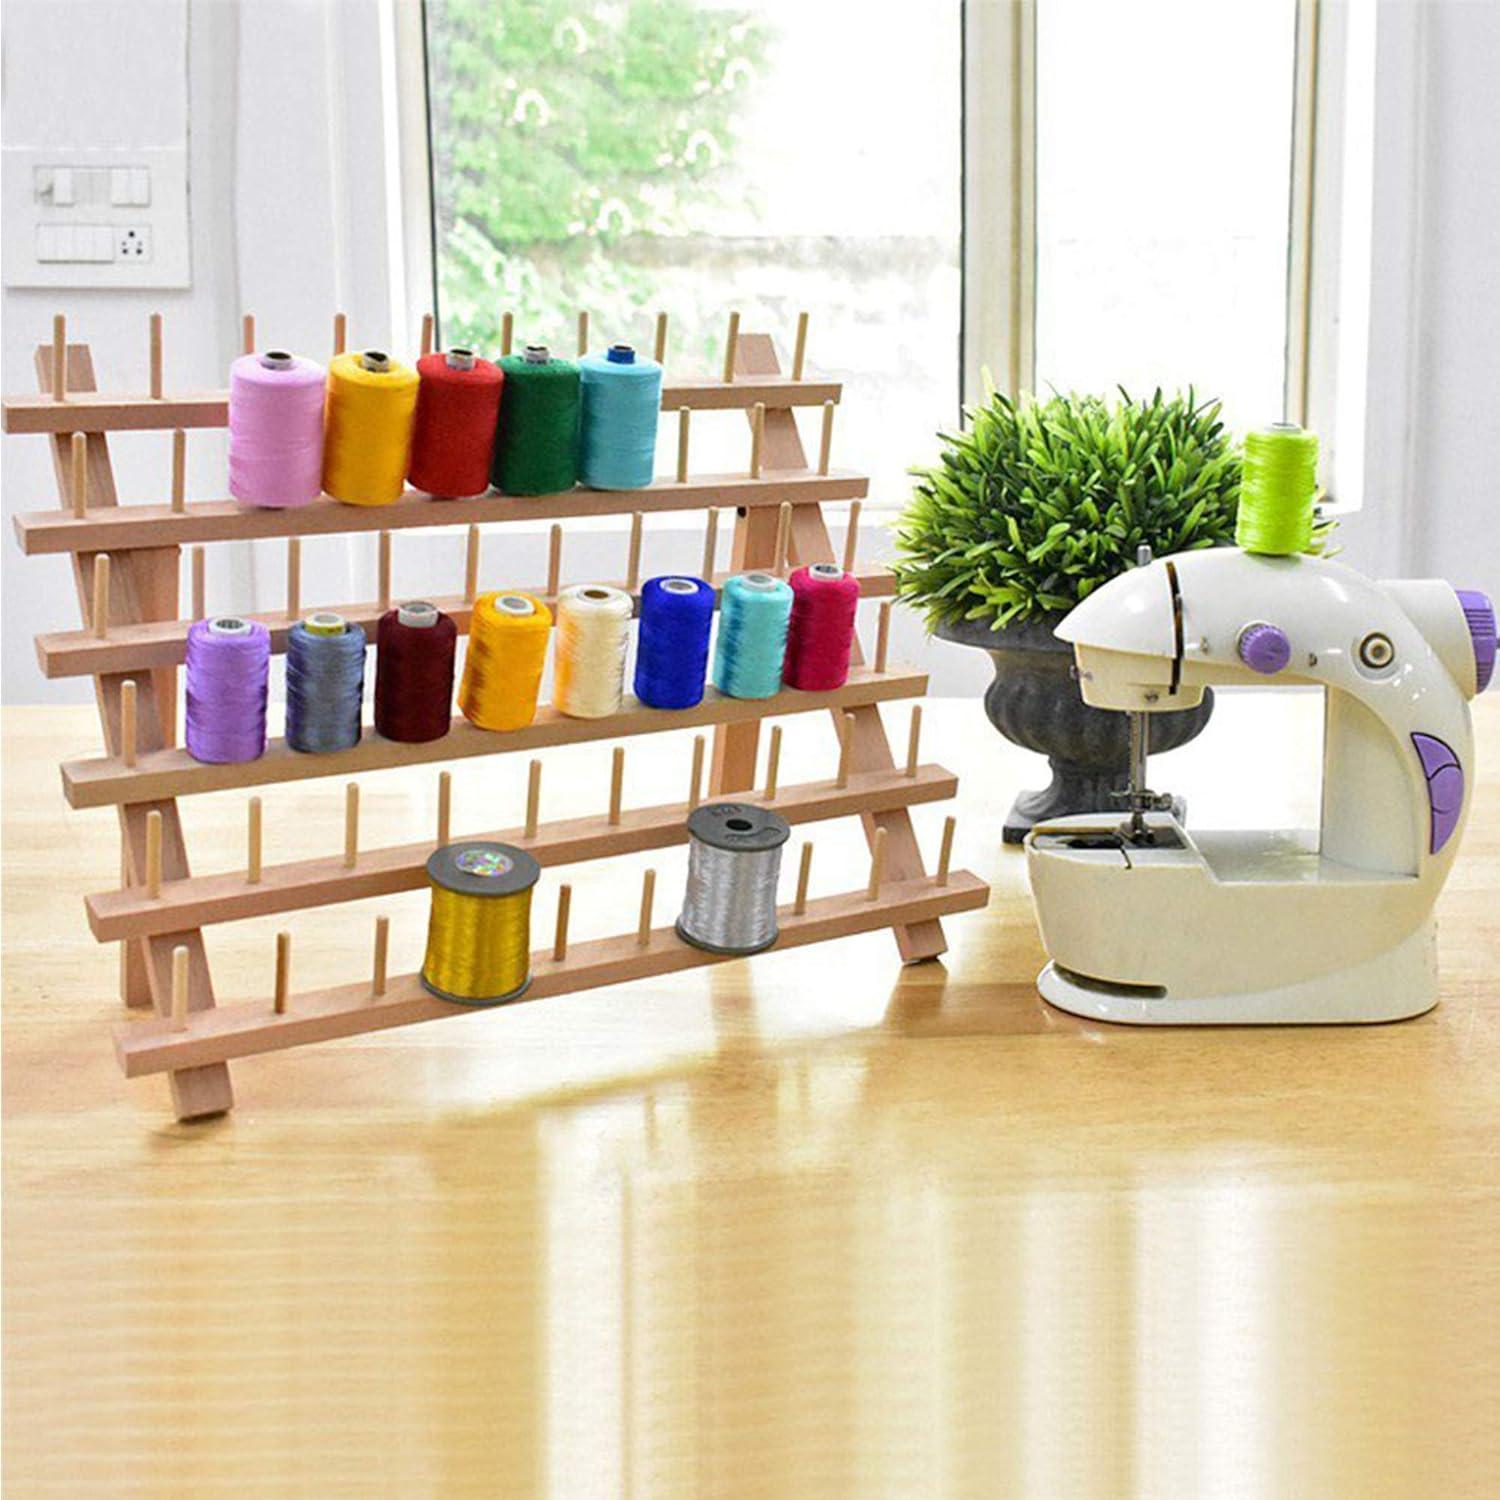 To whoever recommended this sewing thread rack as a pump/bottle